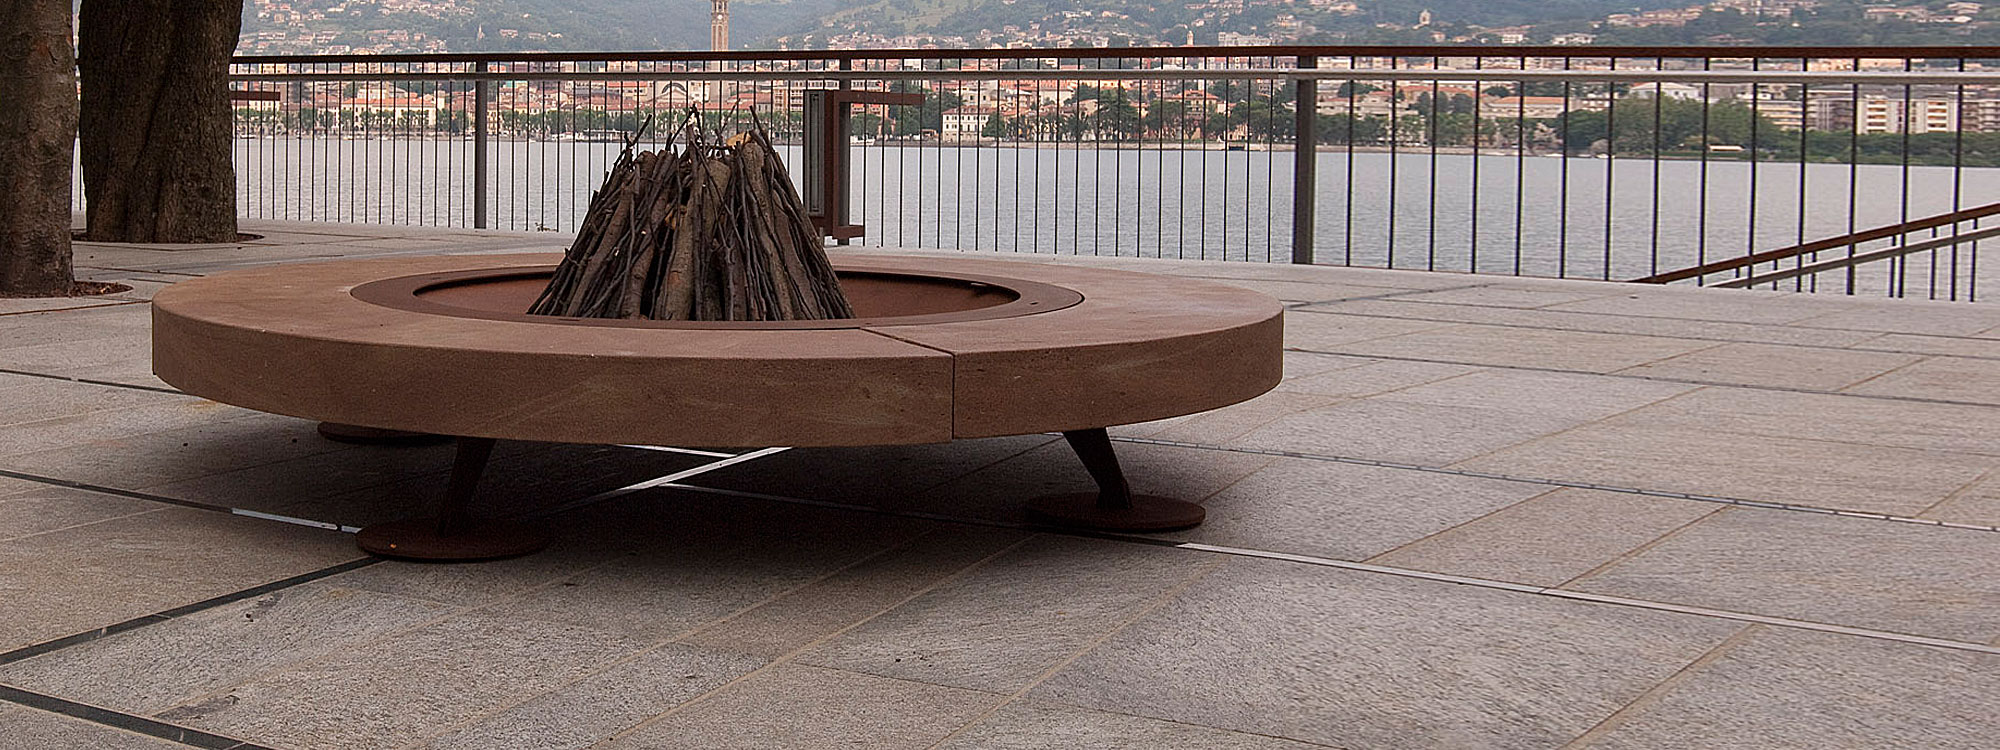 Image of Rondo fire pit by AK47 Design on shores of Lake Como, Italy.